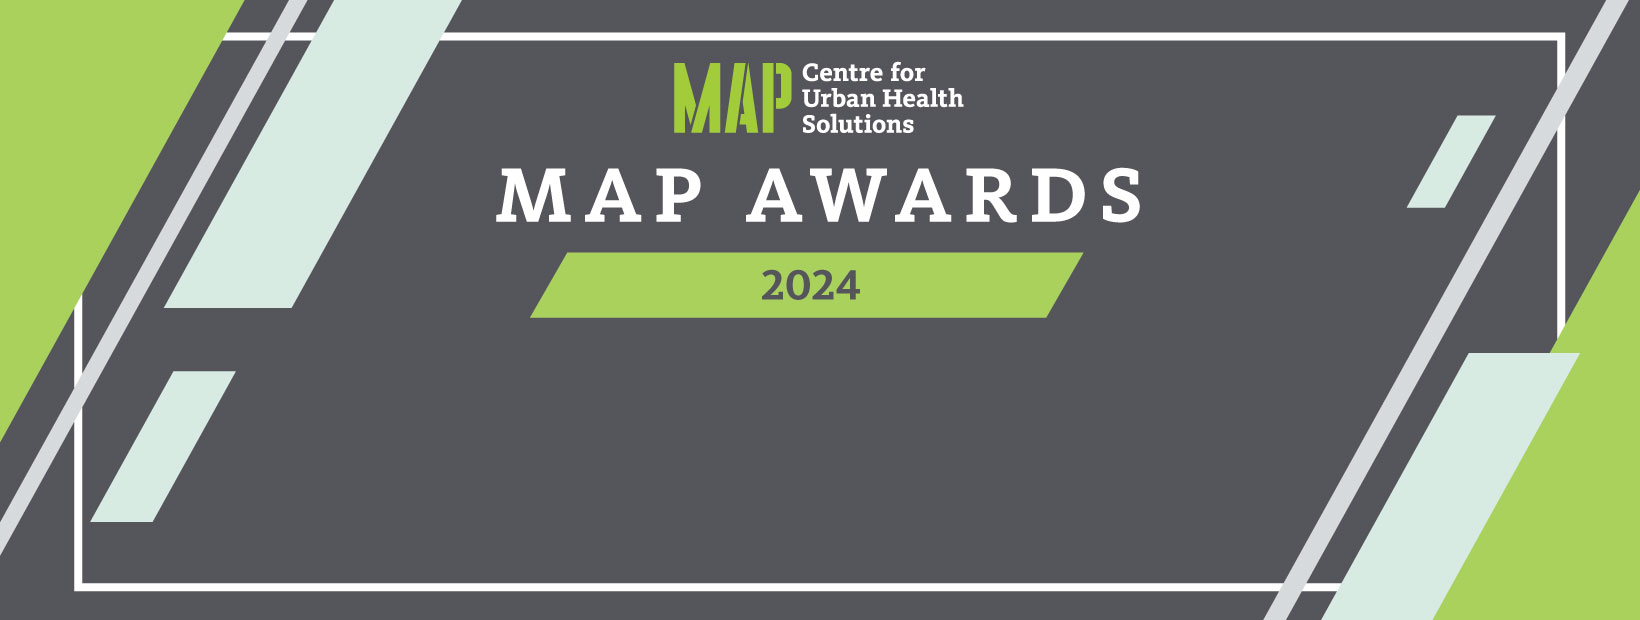 Celebrating our incredible staff: Congratulations to the 2024 MAP Award winners!